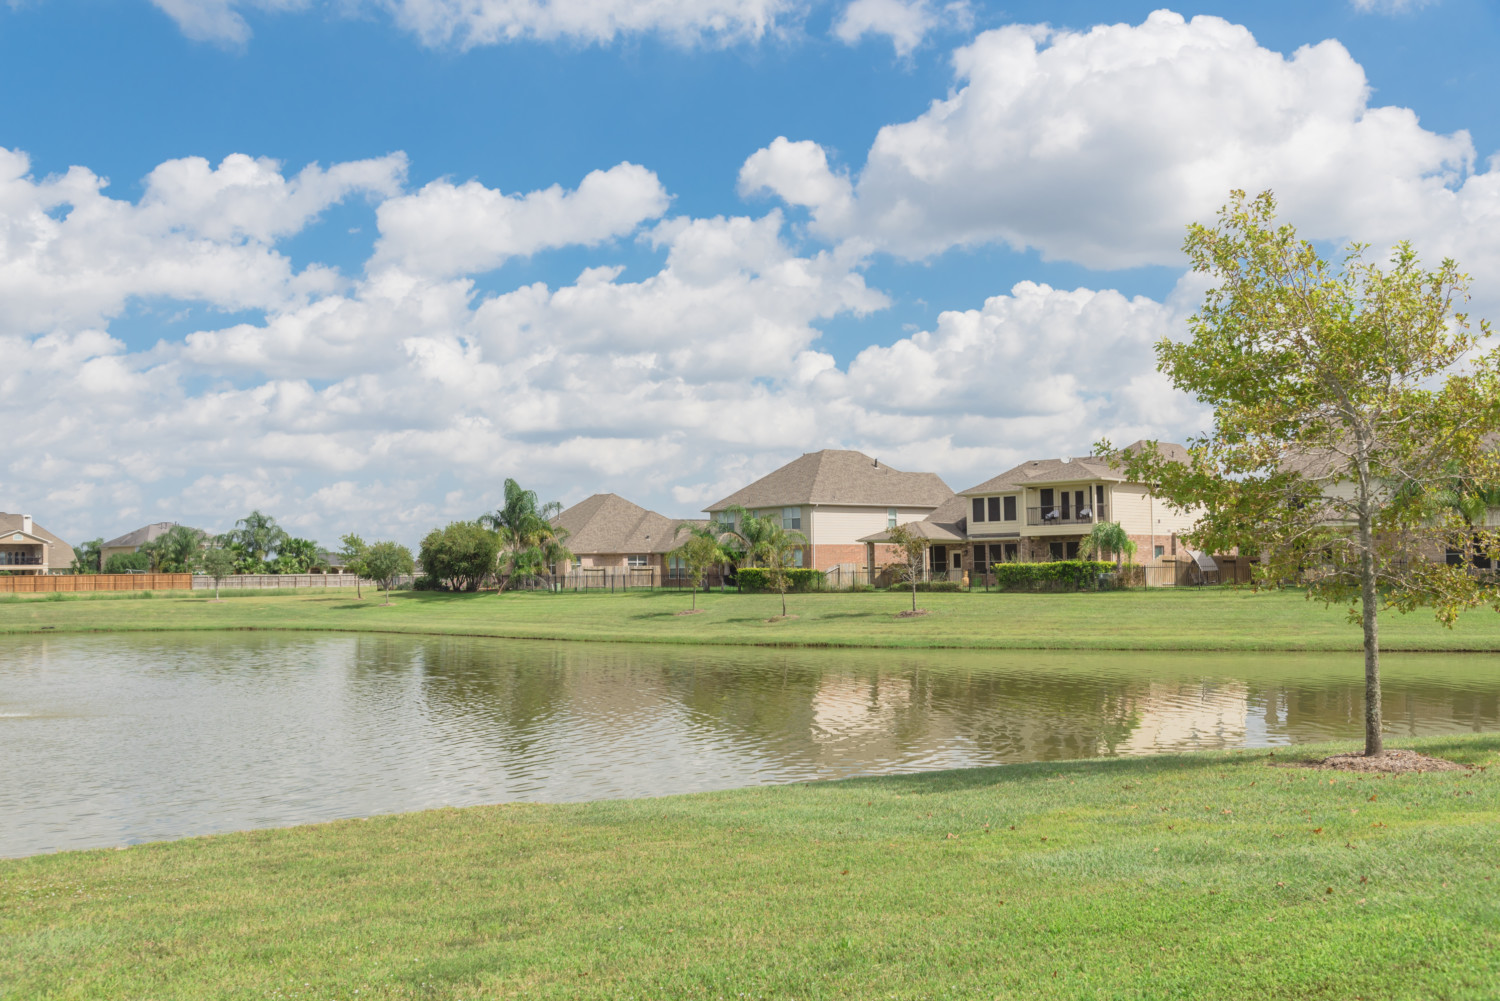 Pearland Texas houses